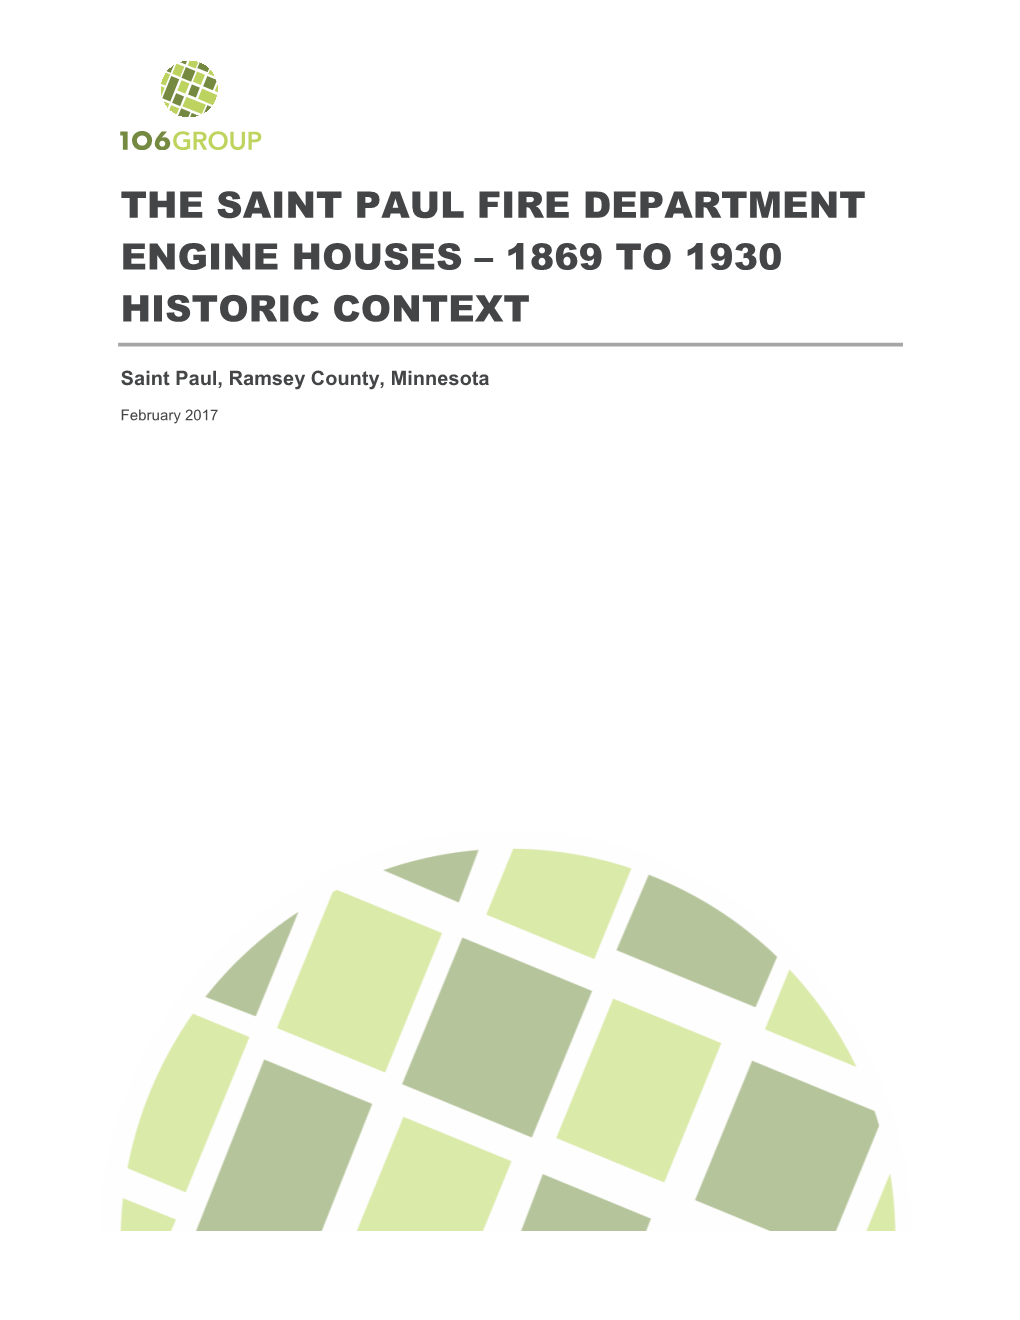 The Saint Paul Fire Department Engine Houses – 1869 to 1930 Historic Context